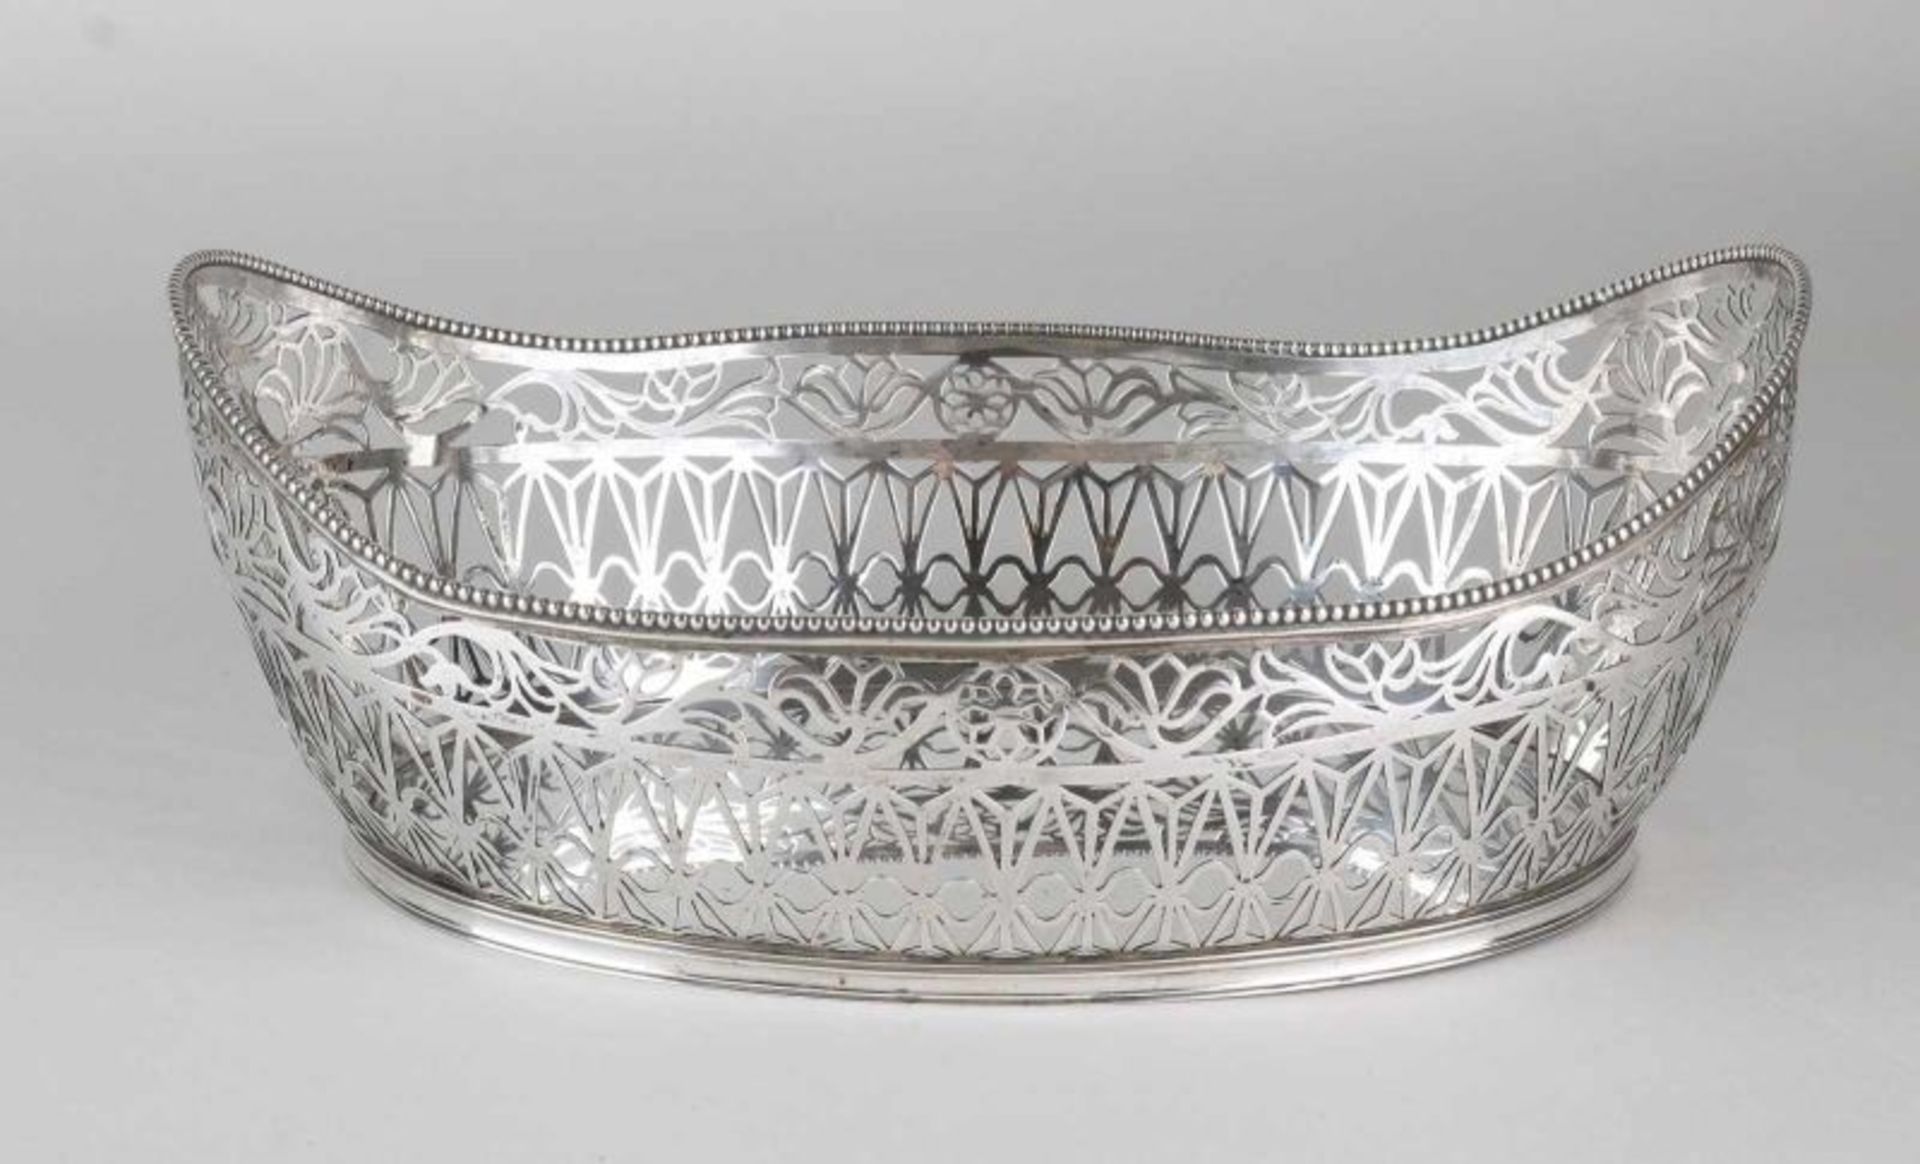 Silver bread basket, 833/000, oval sawn model with a pearl border and floral decor. MT. HM Mansvelt,